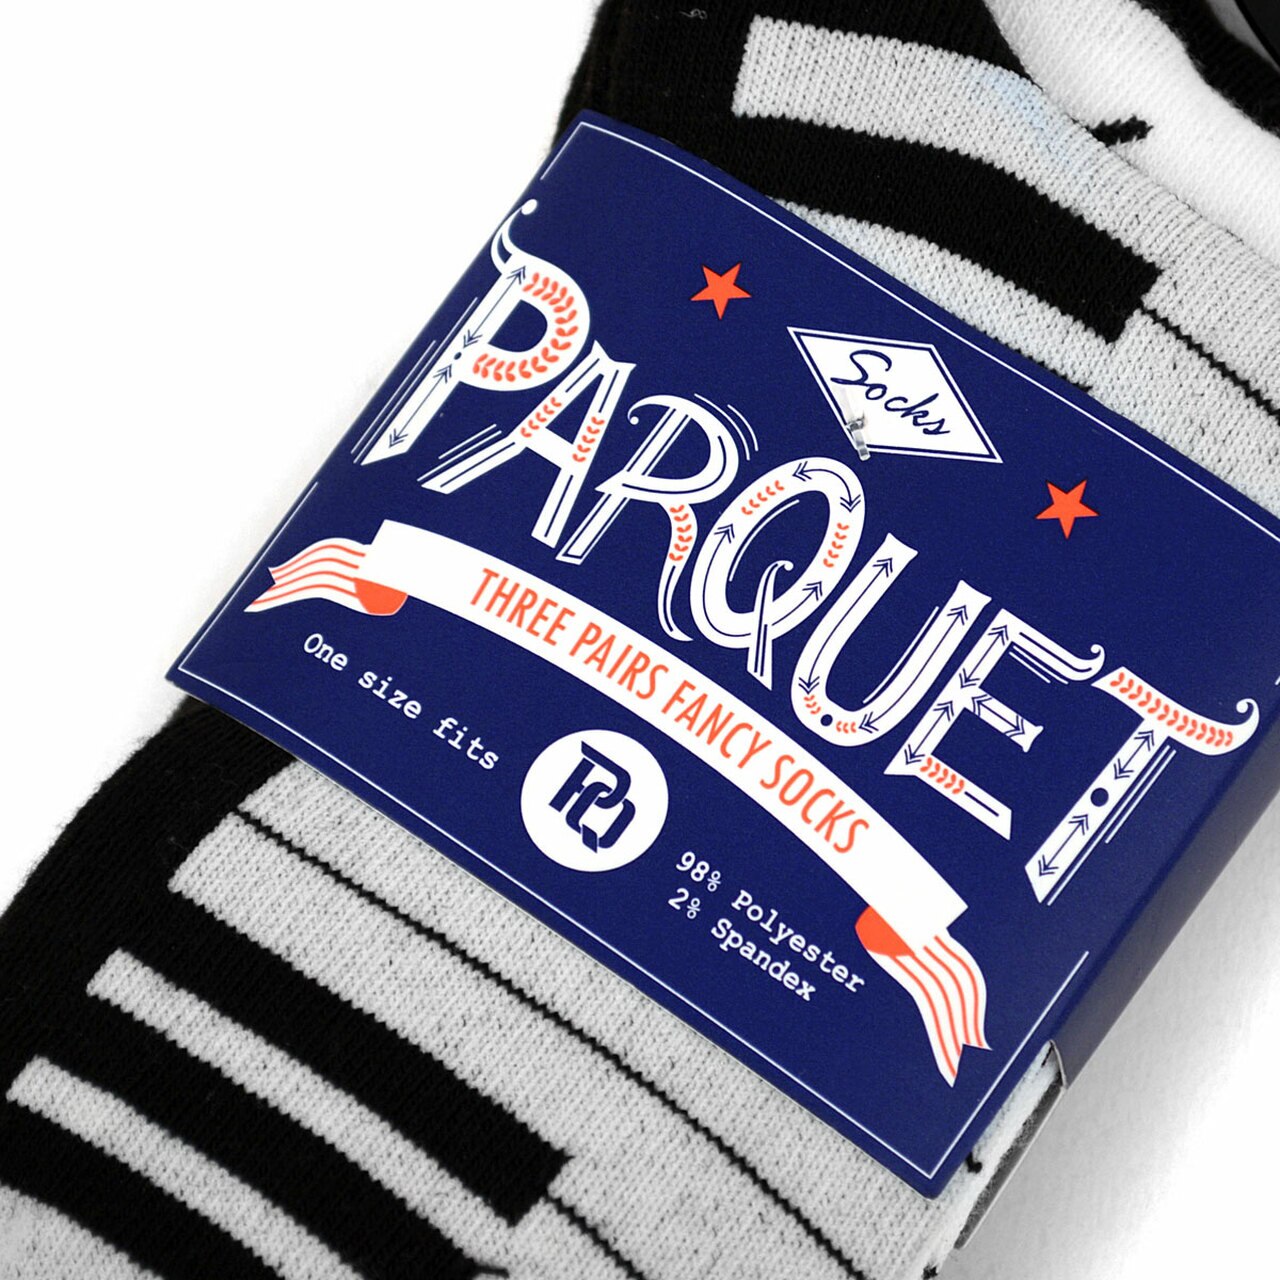 3 pairs Women's Music Theme Novelty Socks  Add some fun to your outfit with our Novelty Socks. This 3 Pack of womens novelty crew socks features a musical theme. These socks are perfect for anyone musical in your life! The socks in this pack have a pair with musical instruments pattern, a piano keys print, and a music notes pattern.  3 pairs per pack 3 different styles 98% Polyester, 2% Spandex Women's 4-10 shoe size Machine wash, tumble dry low Imported